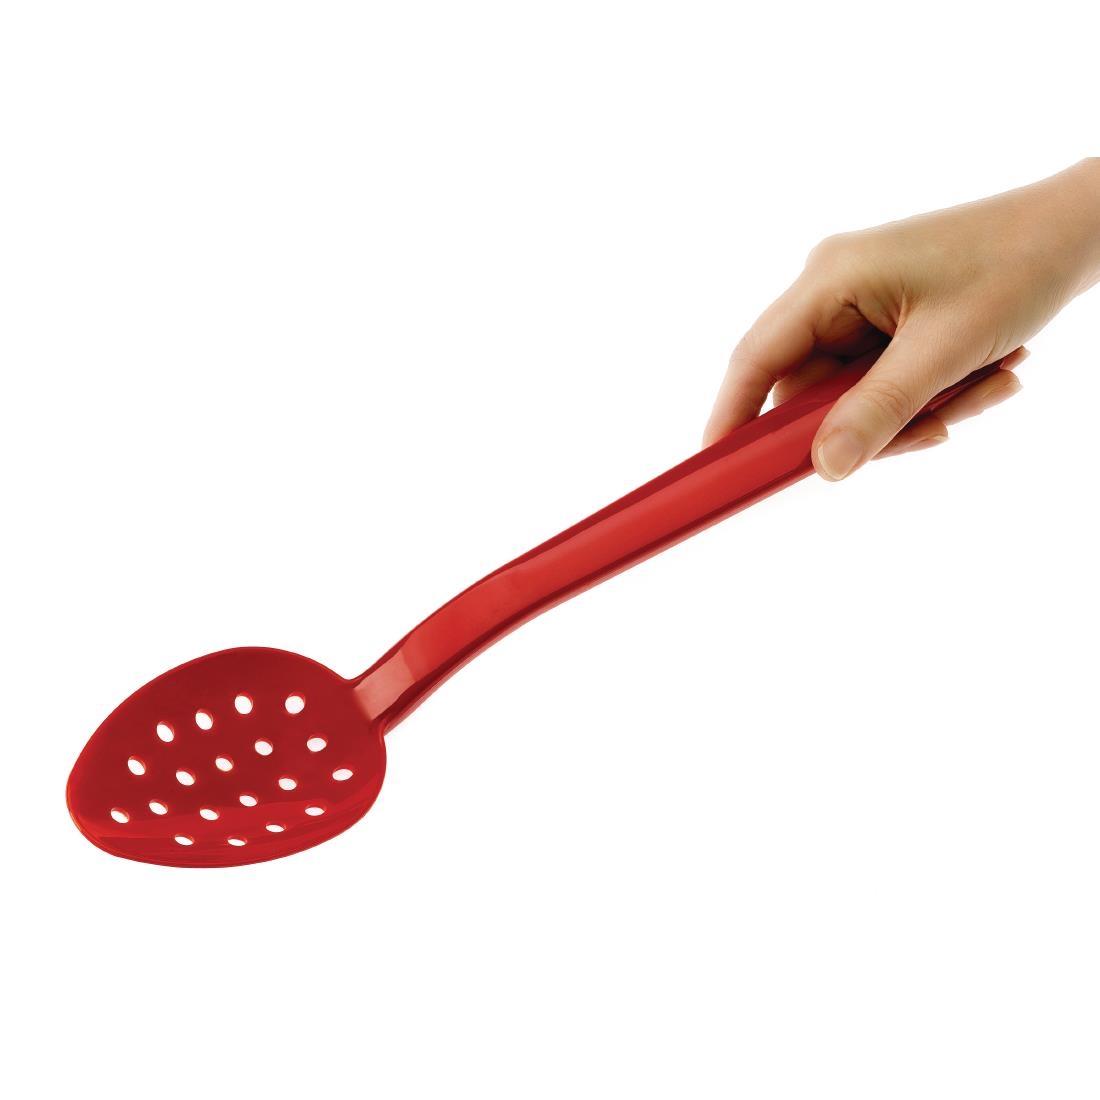 Matfer Bourgeat Exoglass Perforated Serving Spoon Red 13" - DR199  - 2